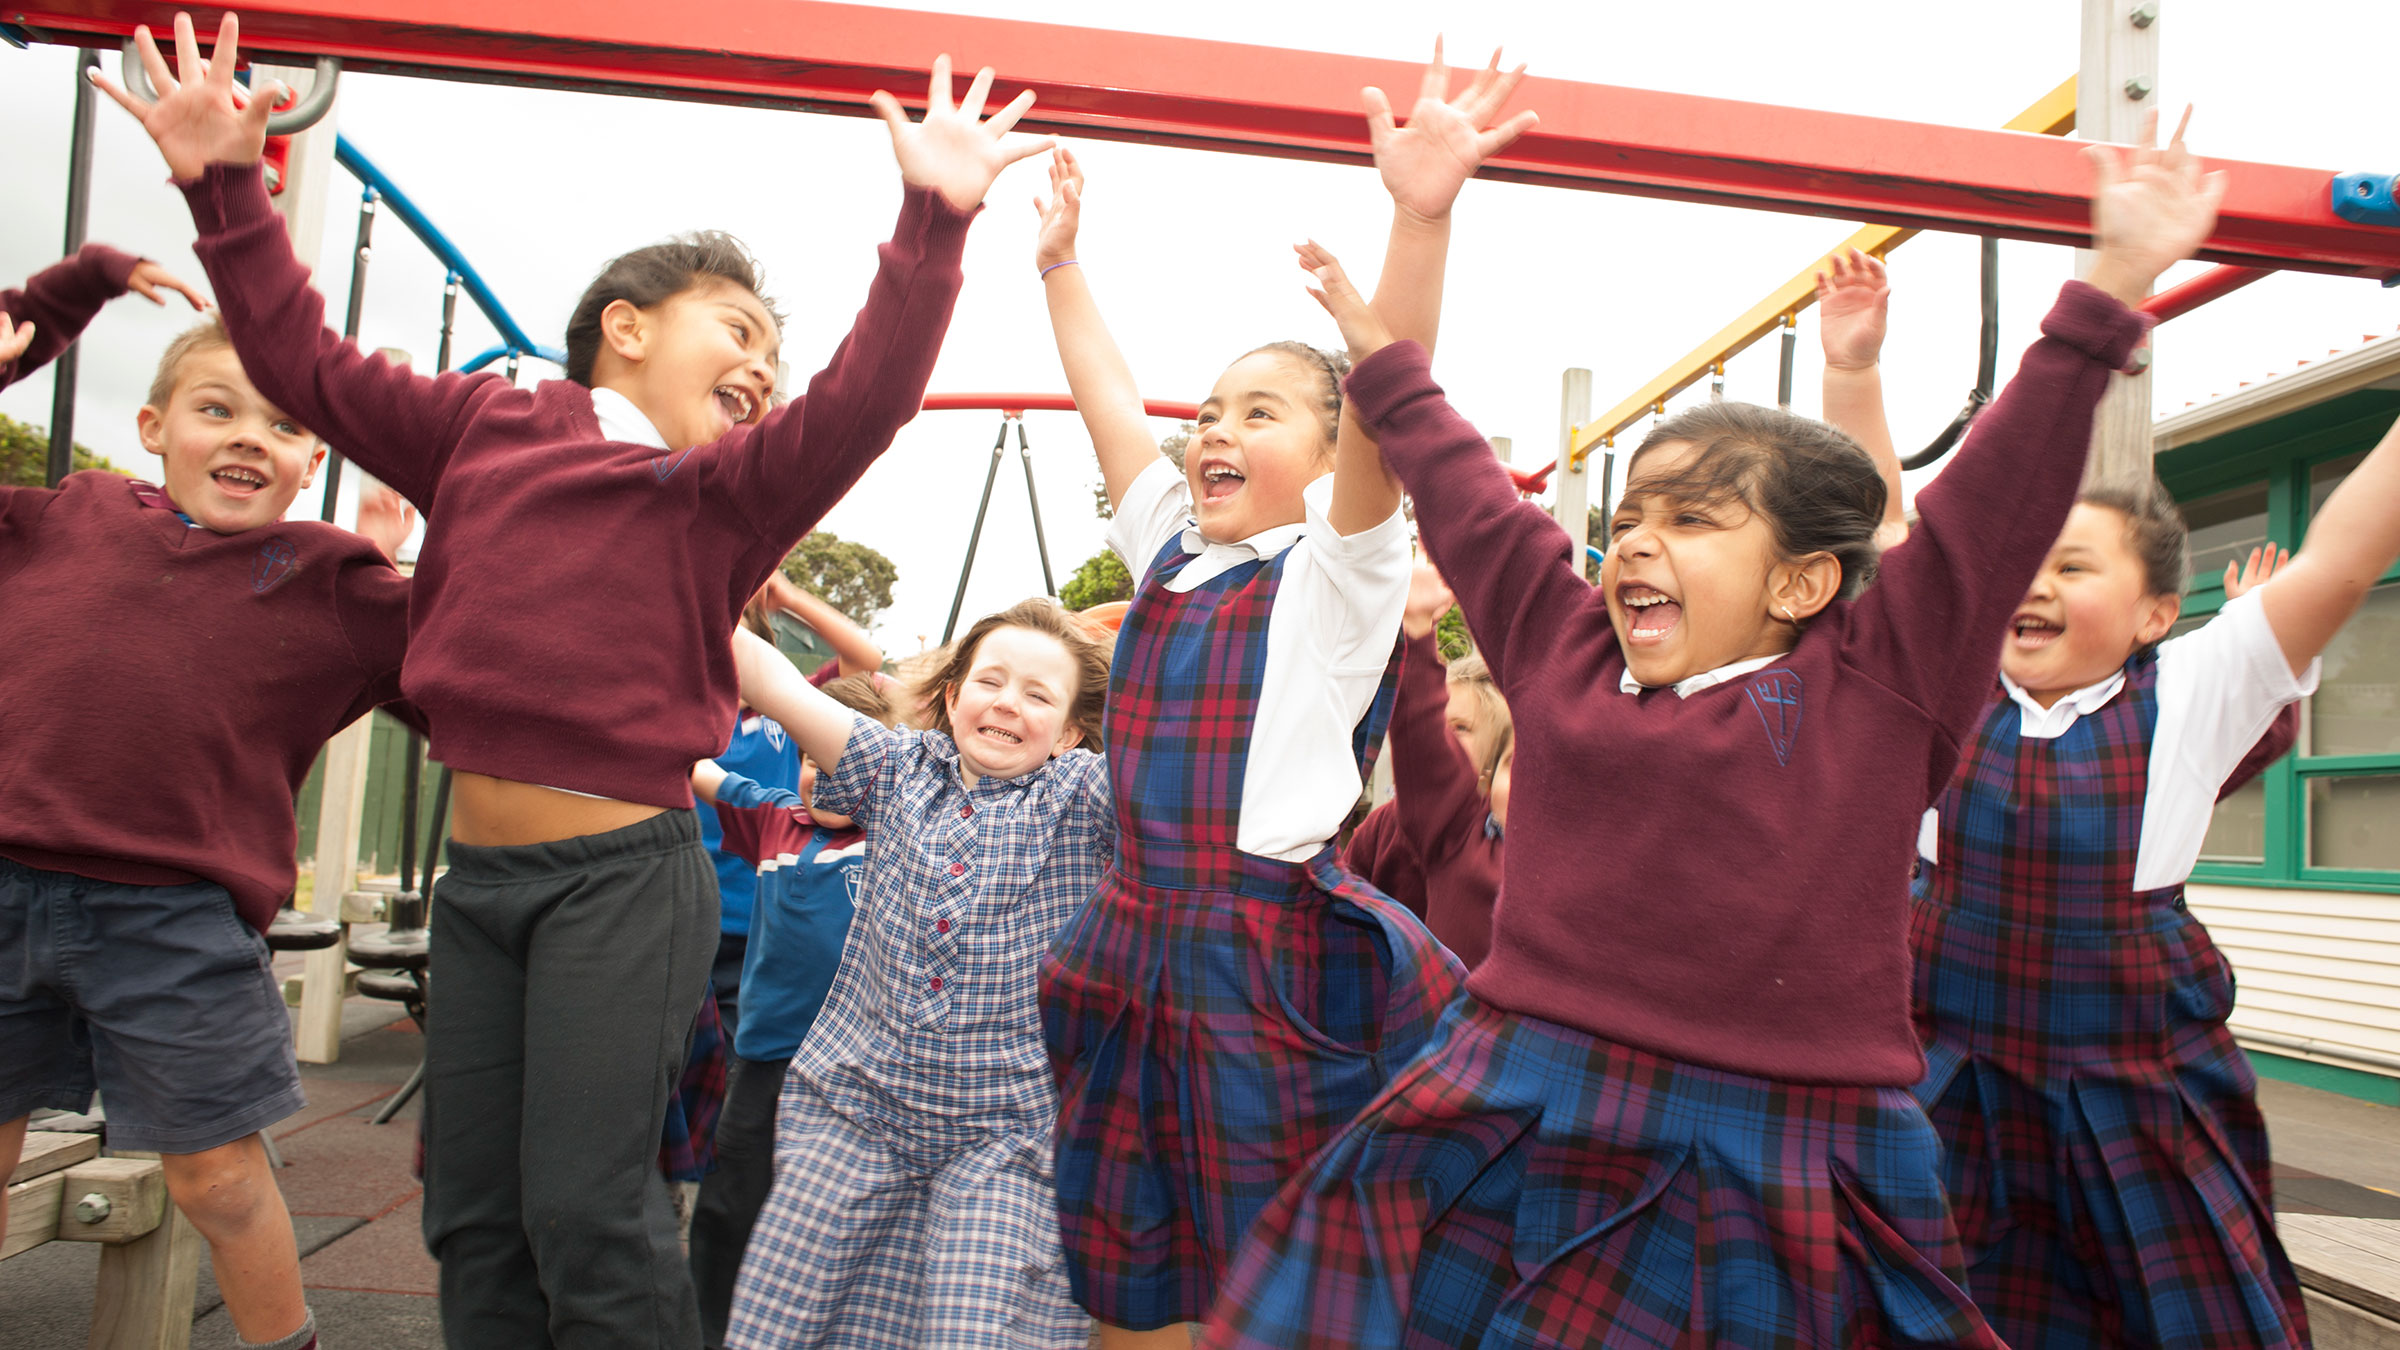 A group of students jumps, smiling and cheering